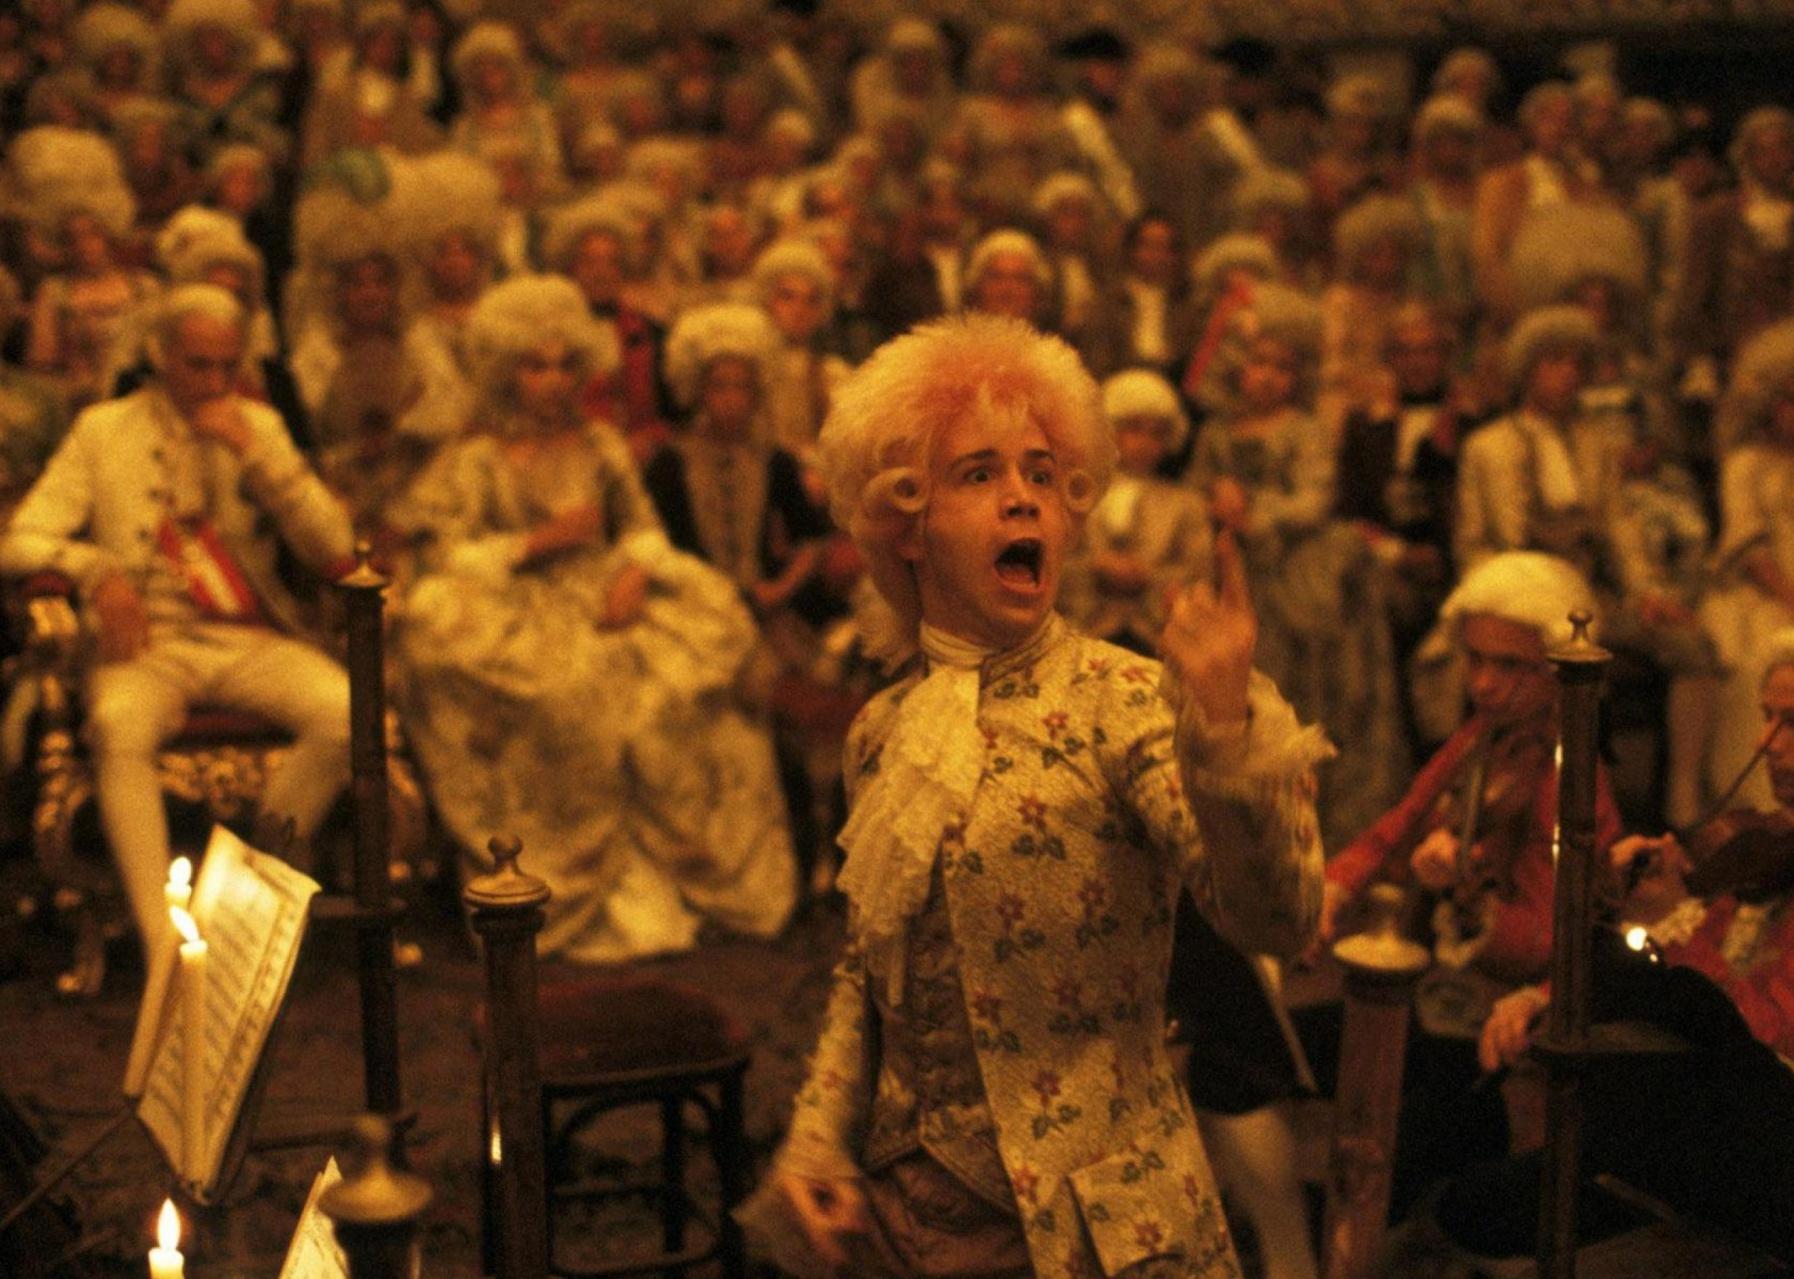 Mozart making a wild face during a show.